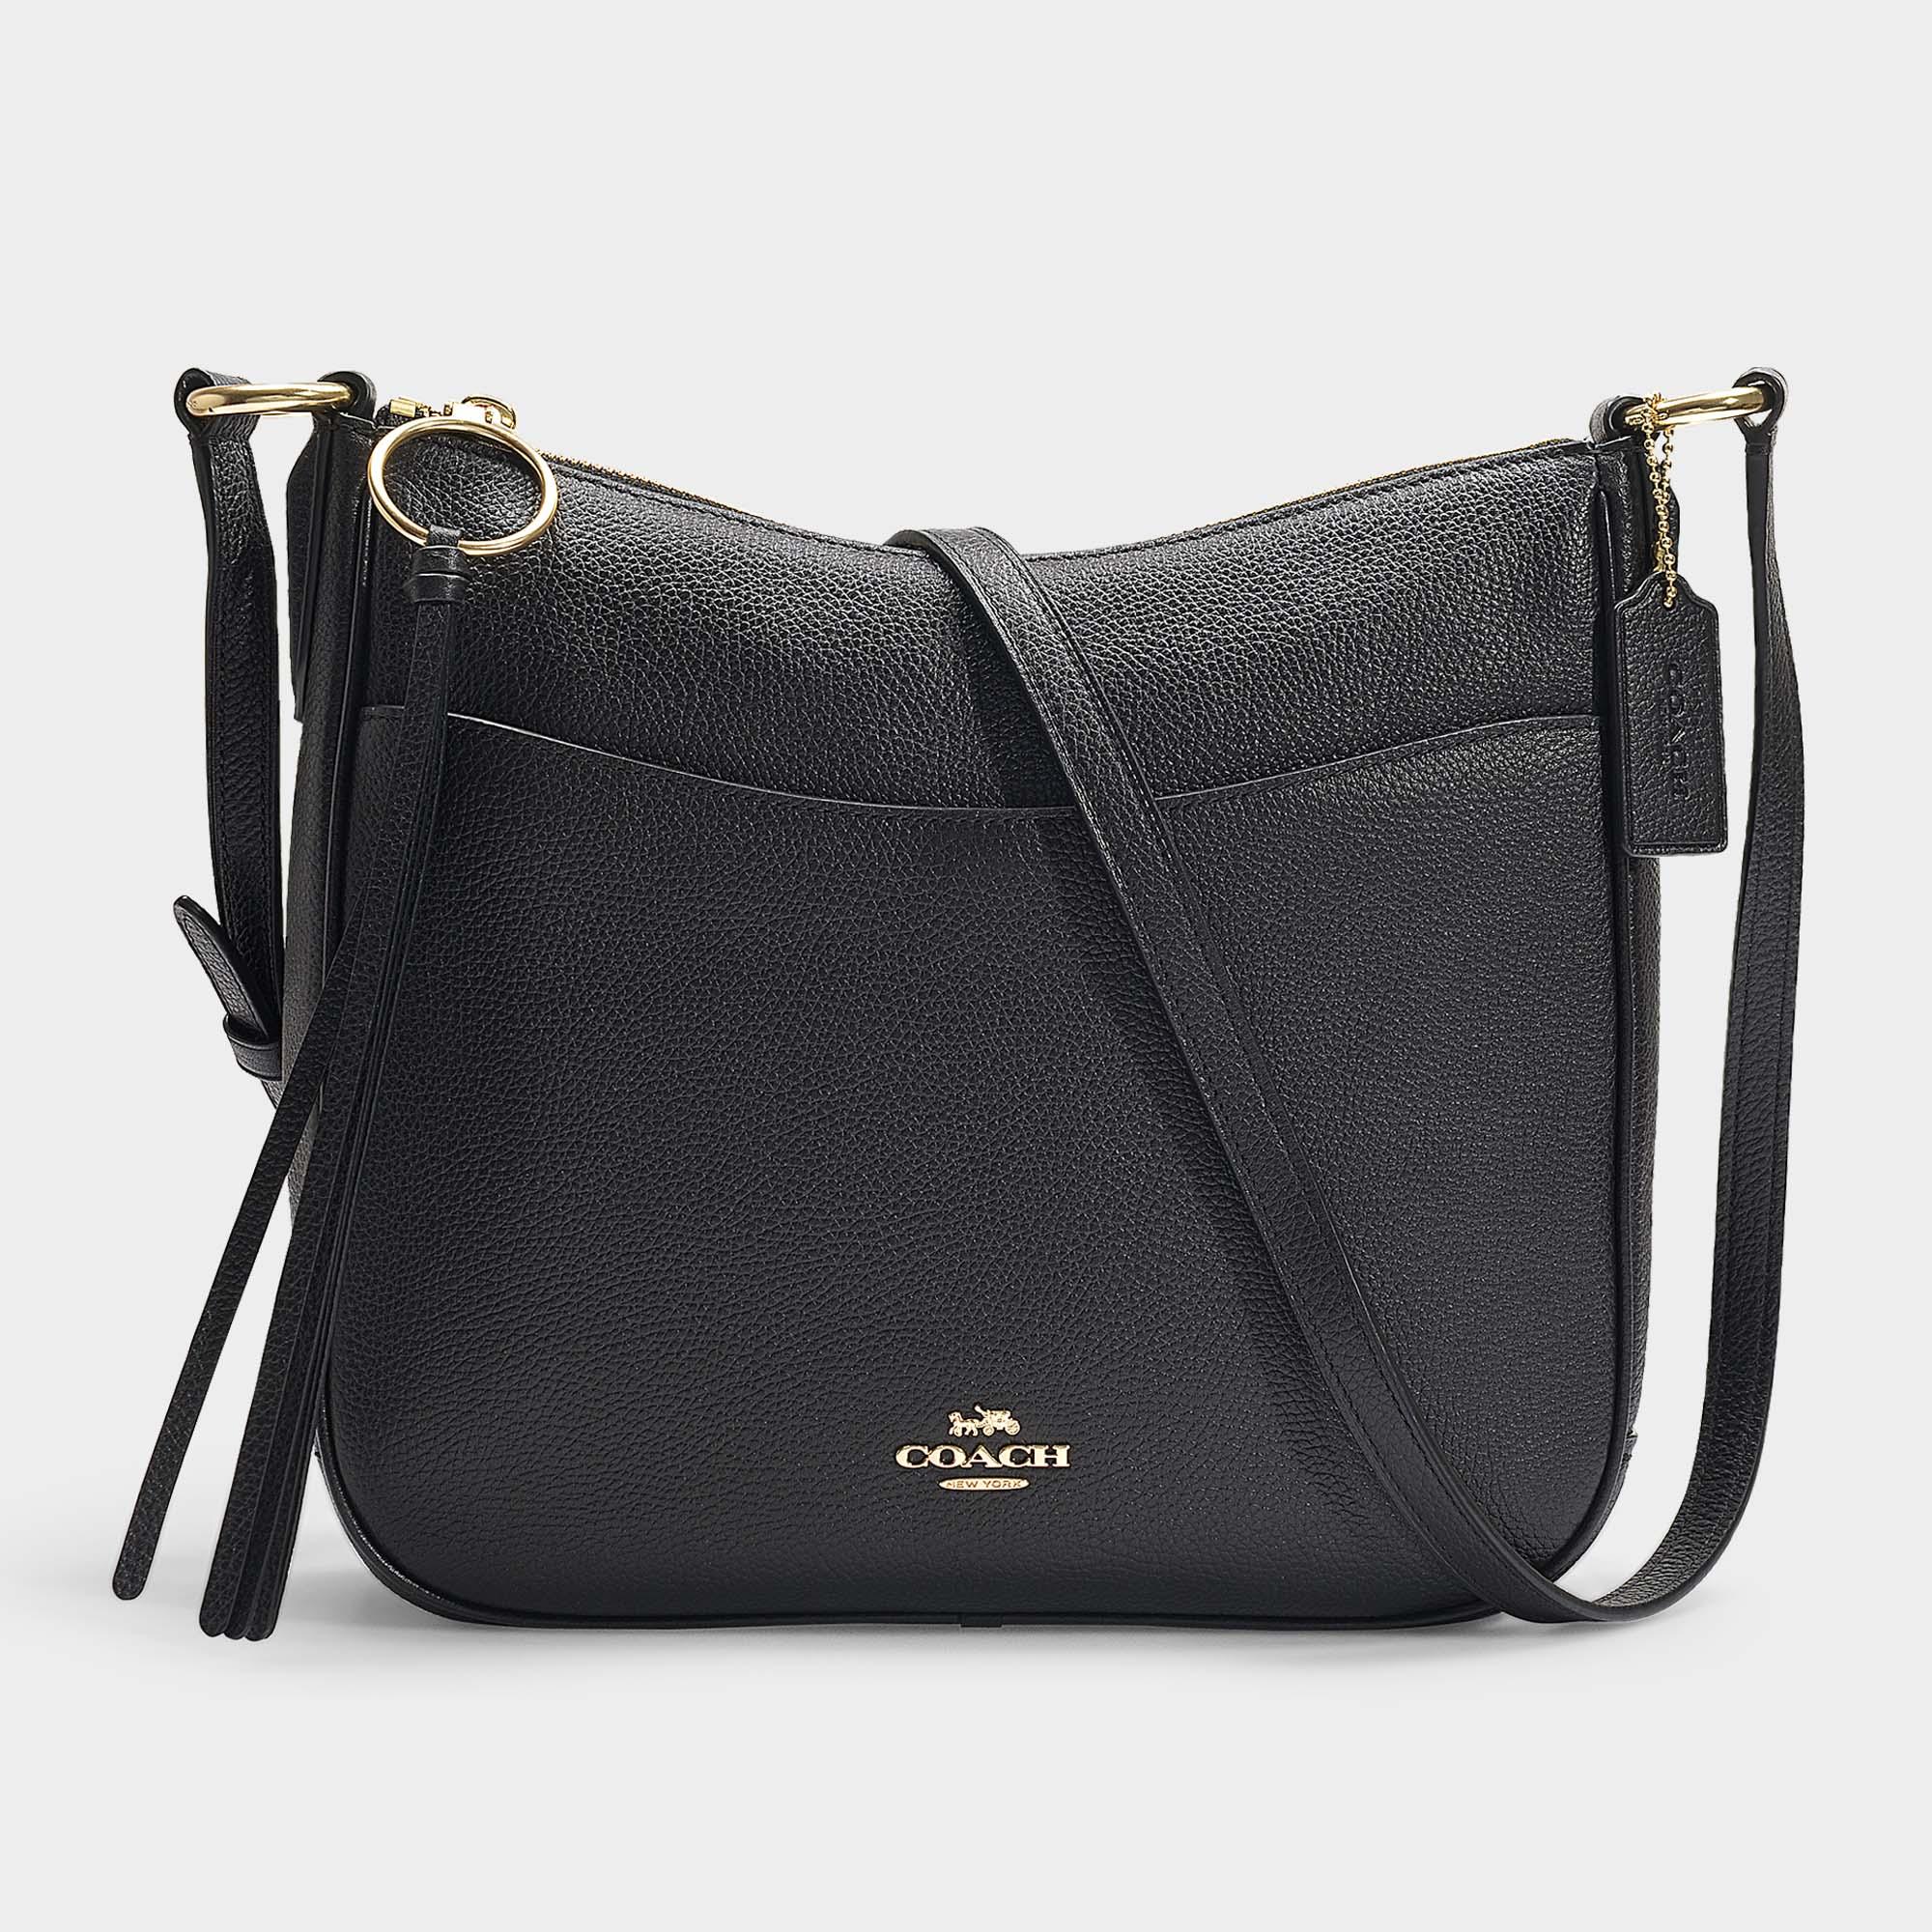 COACH Polished Pebble Leather Chaise Crossbody Bag In Black Calfskin - Lyst